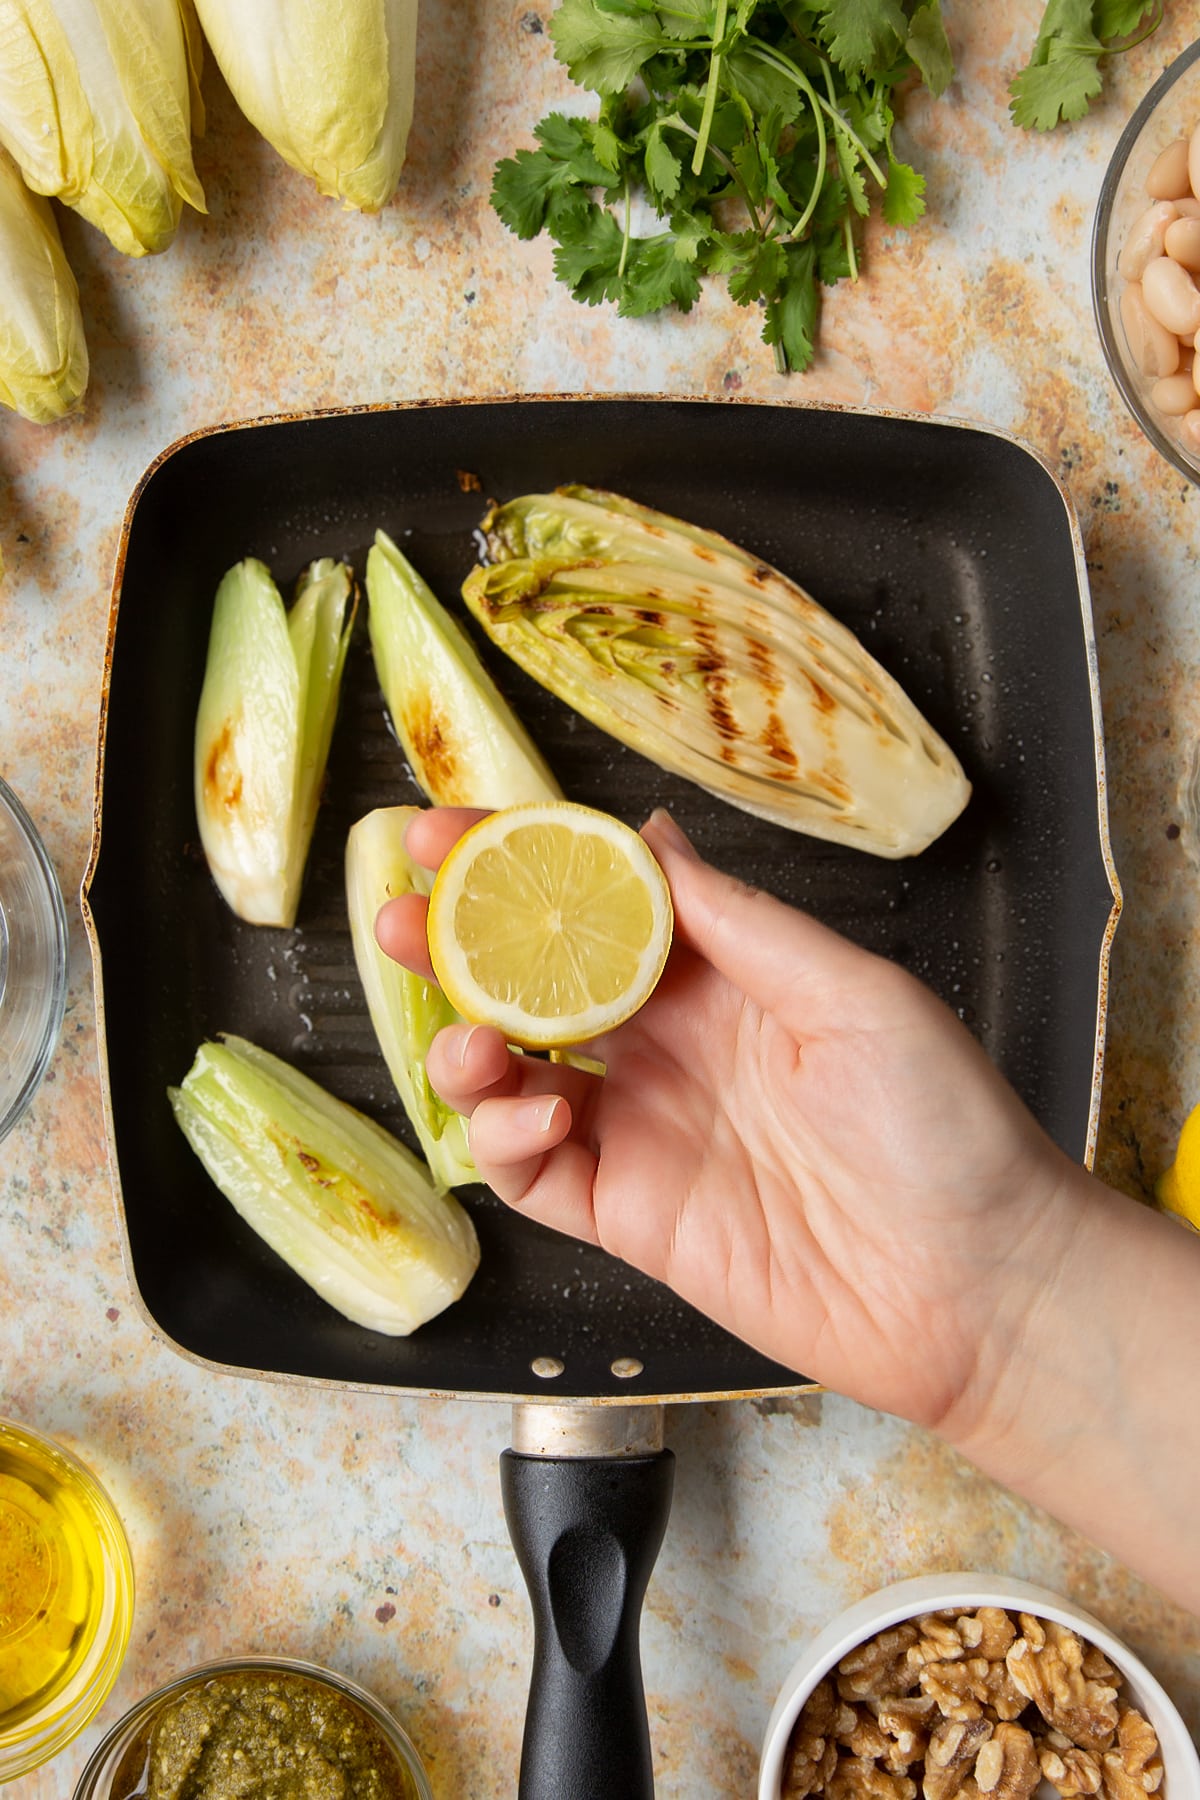 Chicory and fennel in a griddle pan. A hand holds a lemon above.